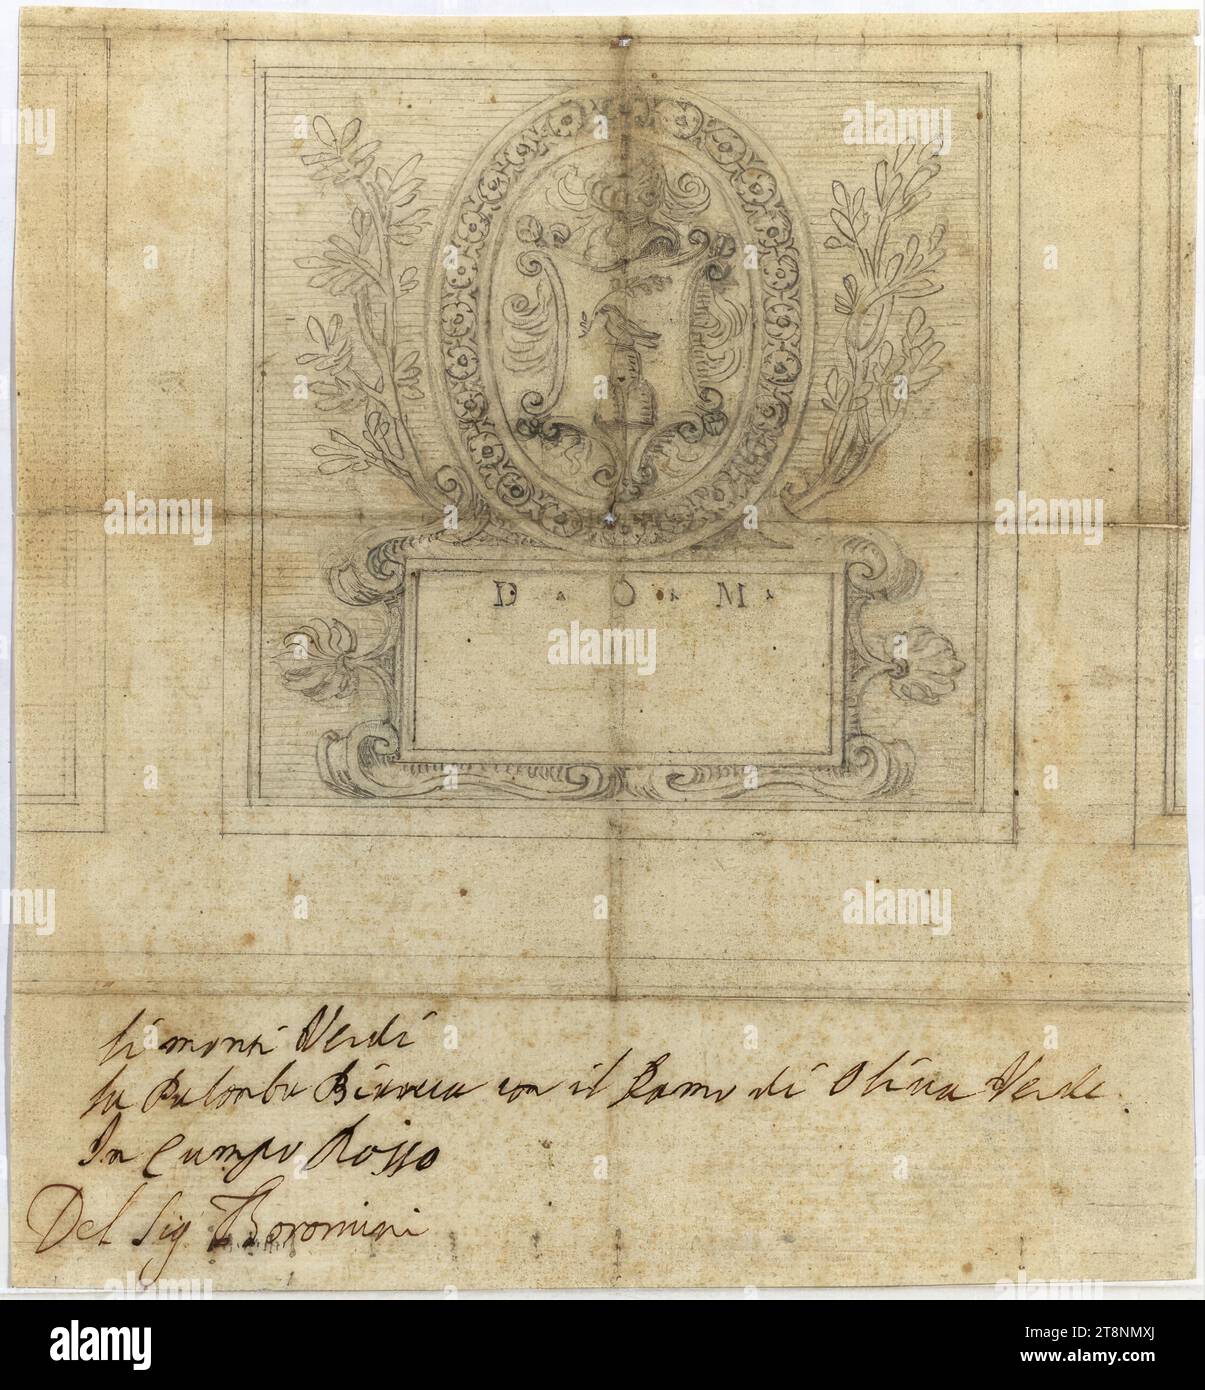 Undetermined, Rome ?, Wall paneling with inscribed panel and Pamphilj coat of arms, architectural drawing, paper, fine; graphite drawing; blind grooves; Drawing and scale in graphite, inscription in pen in brown, 18 x 16.5 cm, 'D. O. M.', below: 'li monti Verdi, La Palomba bianca con il ramo di Oliva Verde., Il Campo Rosso, Del Sig. Boromini Stock Photo